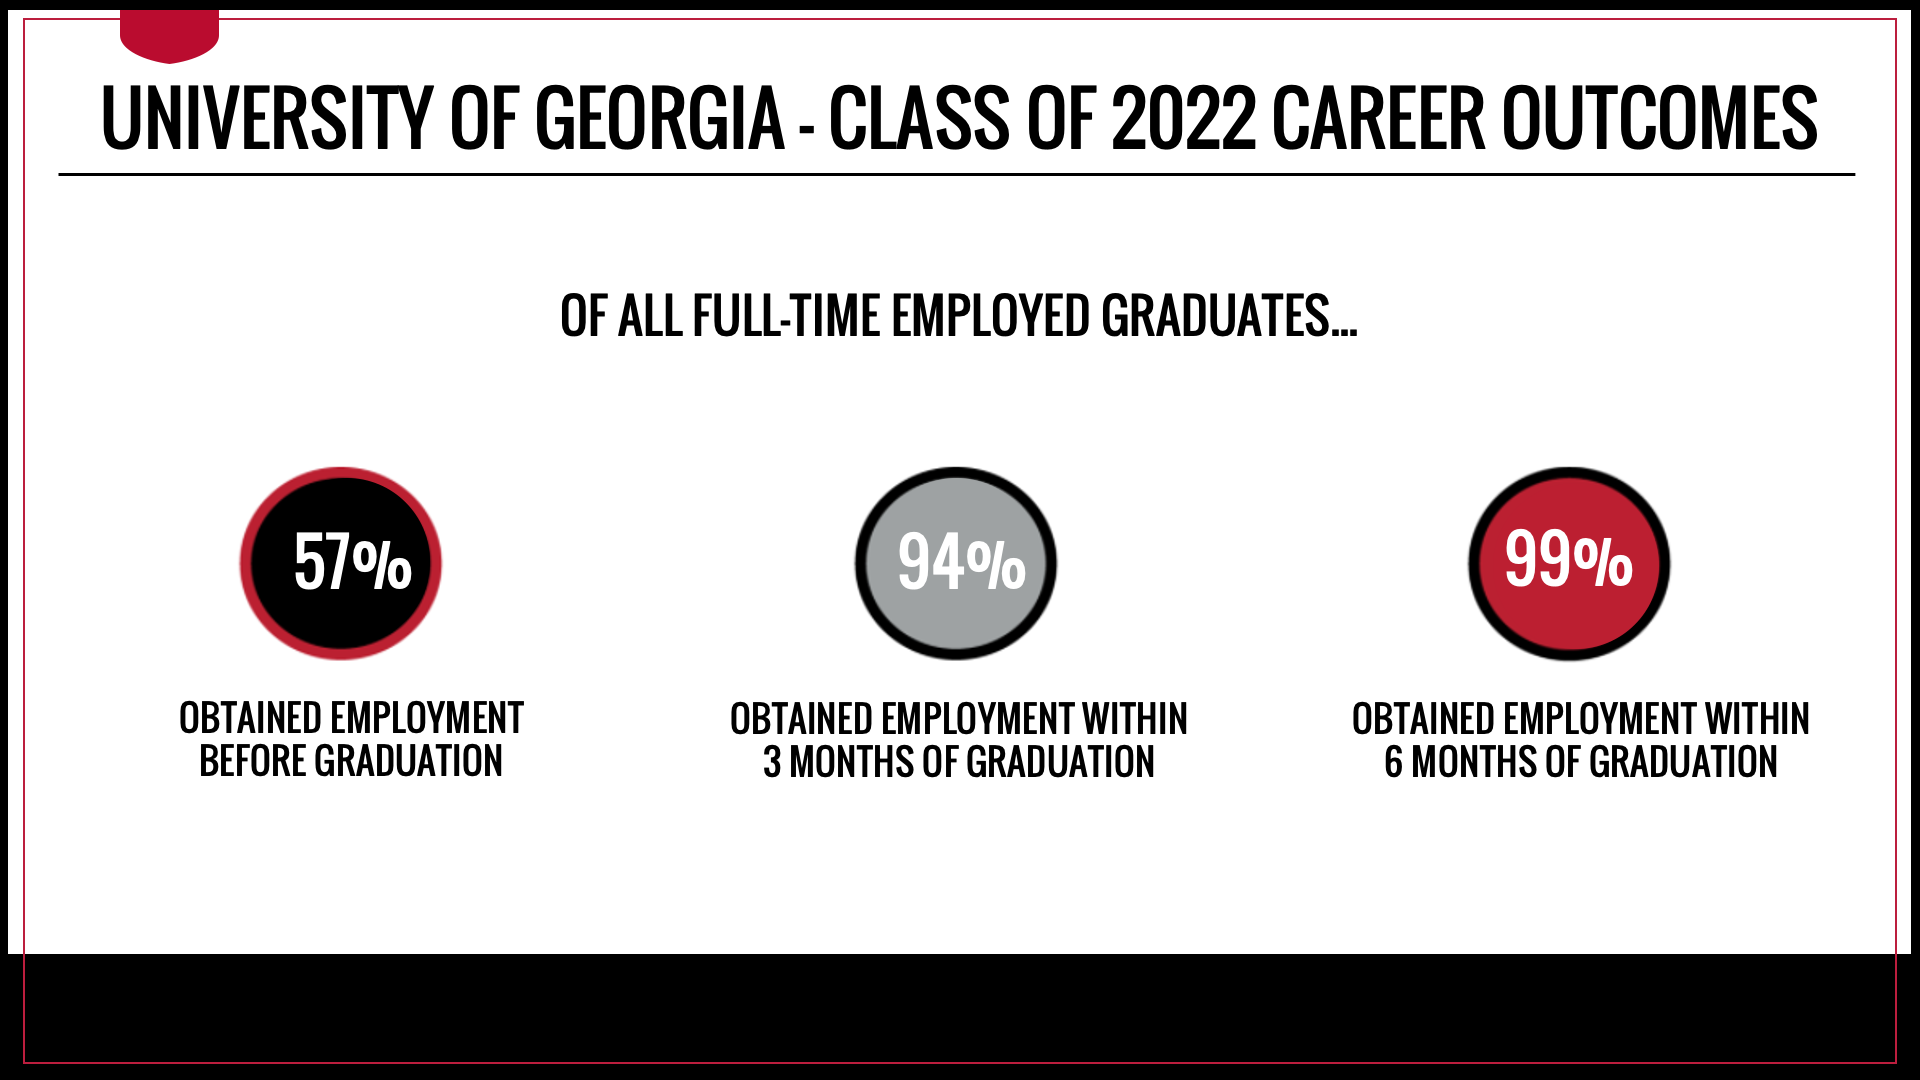 Of all full-time employed UGA Class of 2022 graduates, 57 percent obtained employment before graduation, 94 percent obtained employment within three months of graduation, and 99 percent obtained employment within six months of graduation